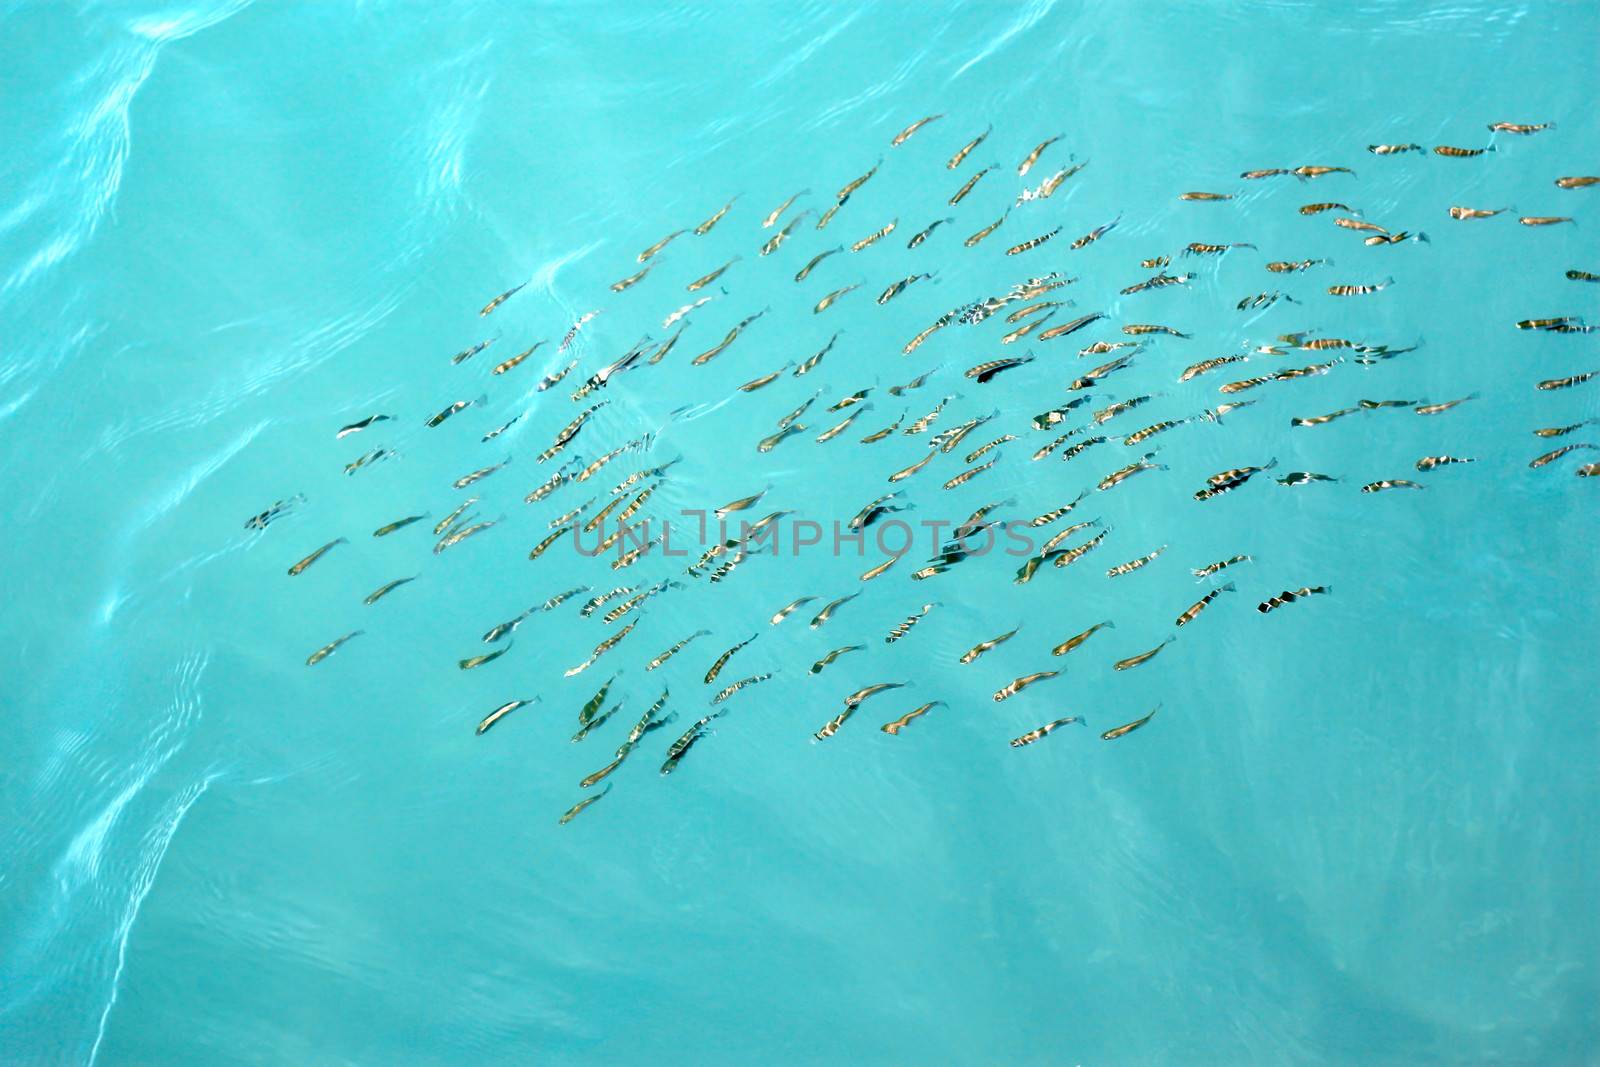 Group of fishes gobies shallowly swim near the surface of sea. Easy waves refracting fish images